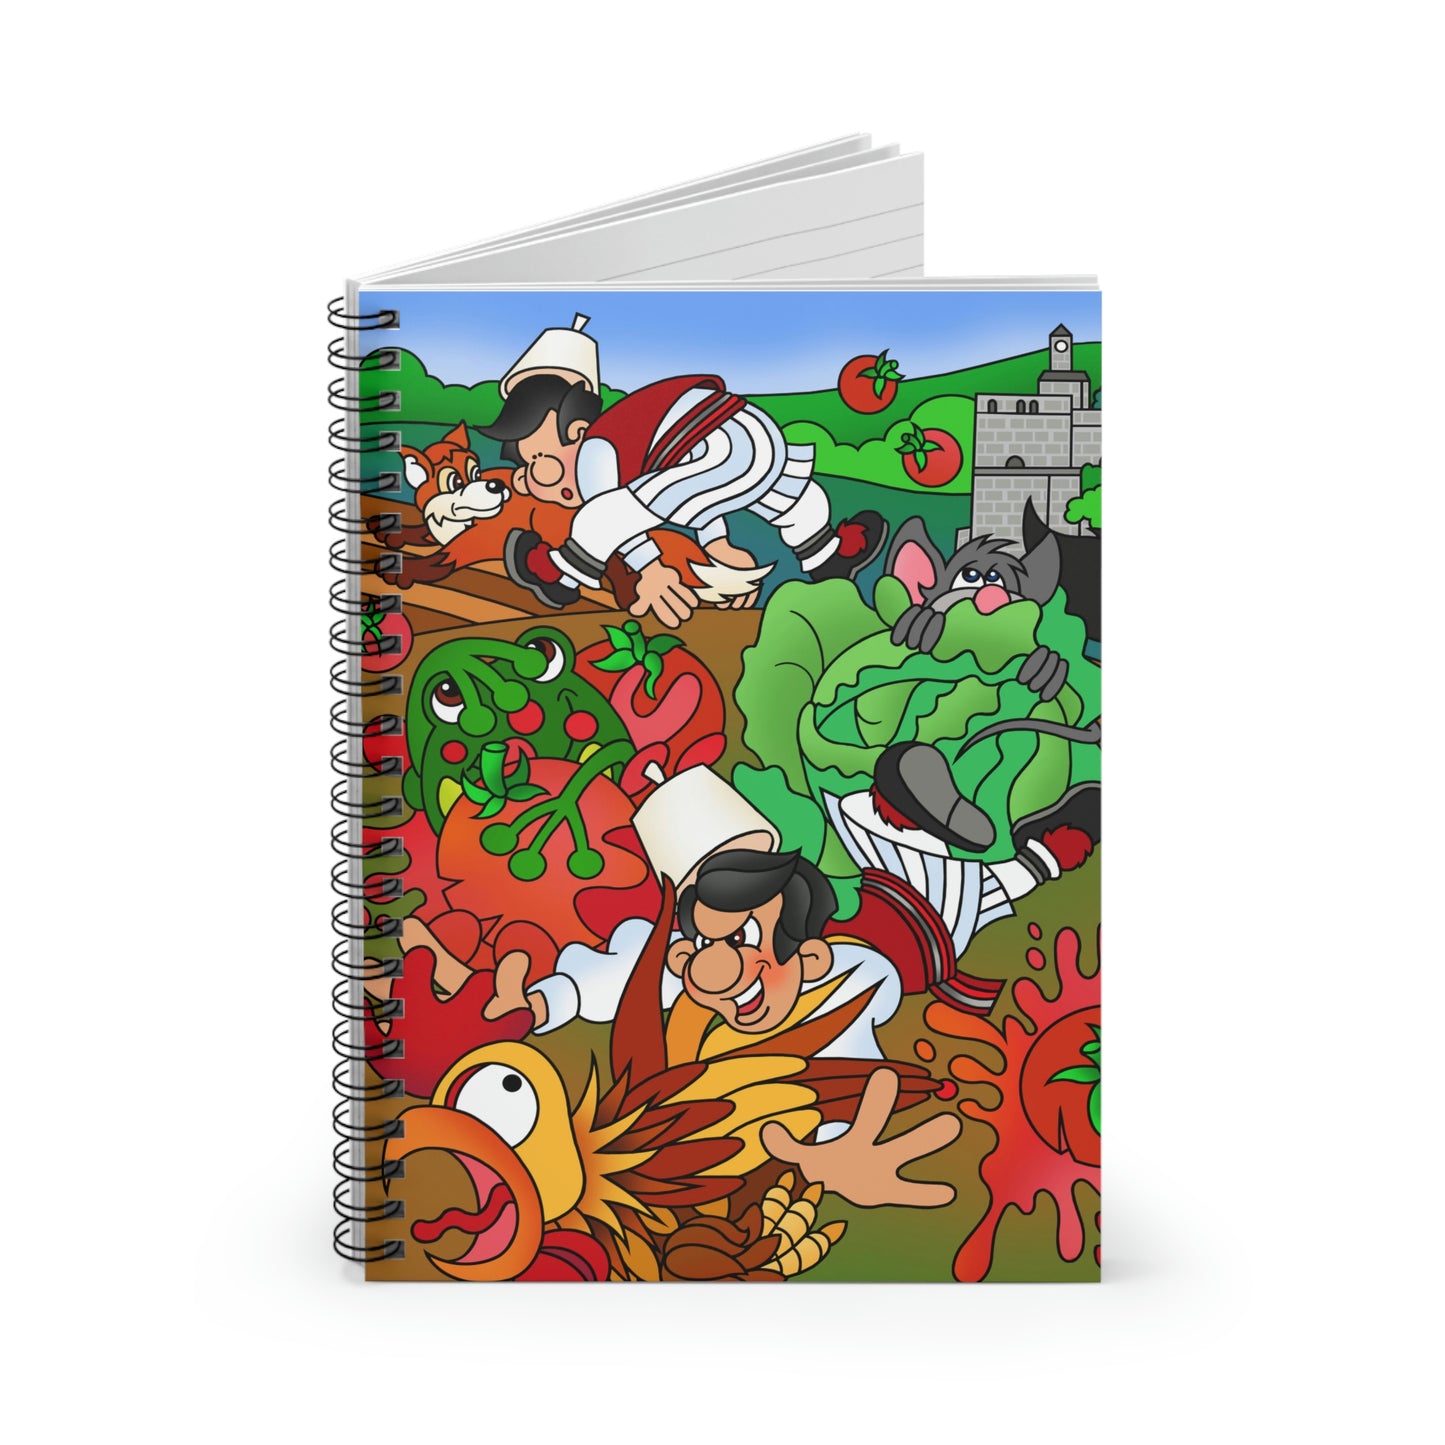 The Half Rooster! Spiral Notebook - Ruled Line